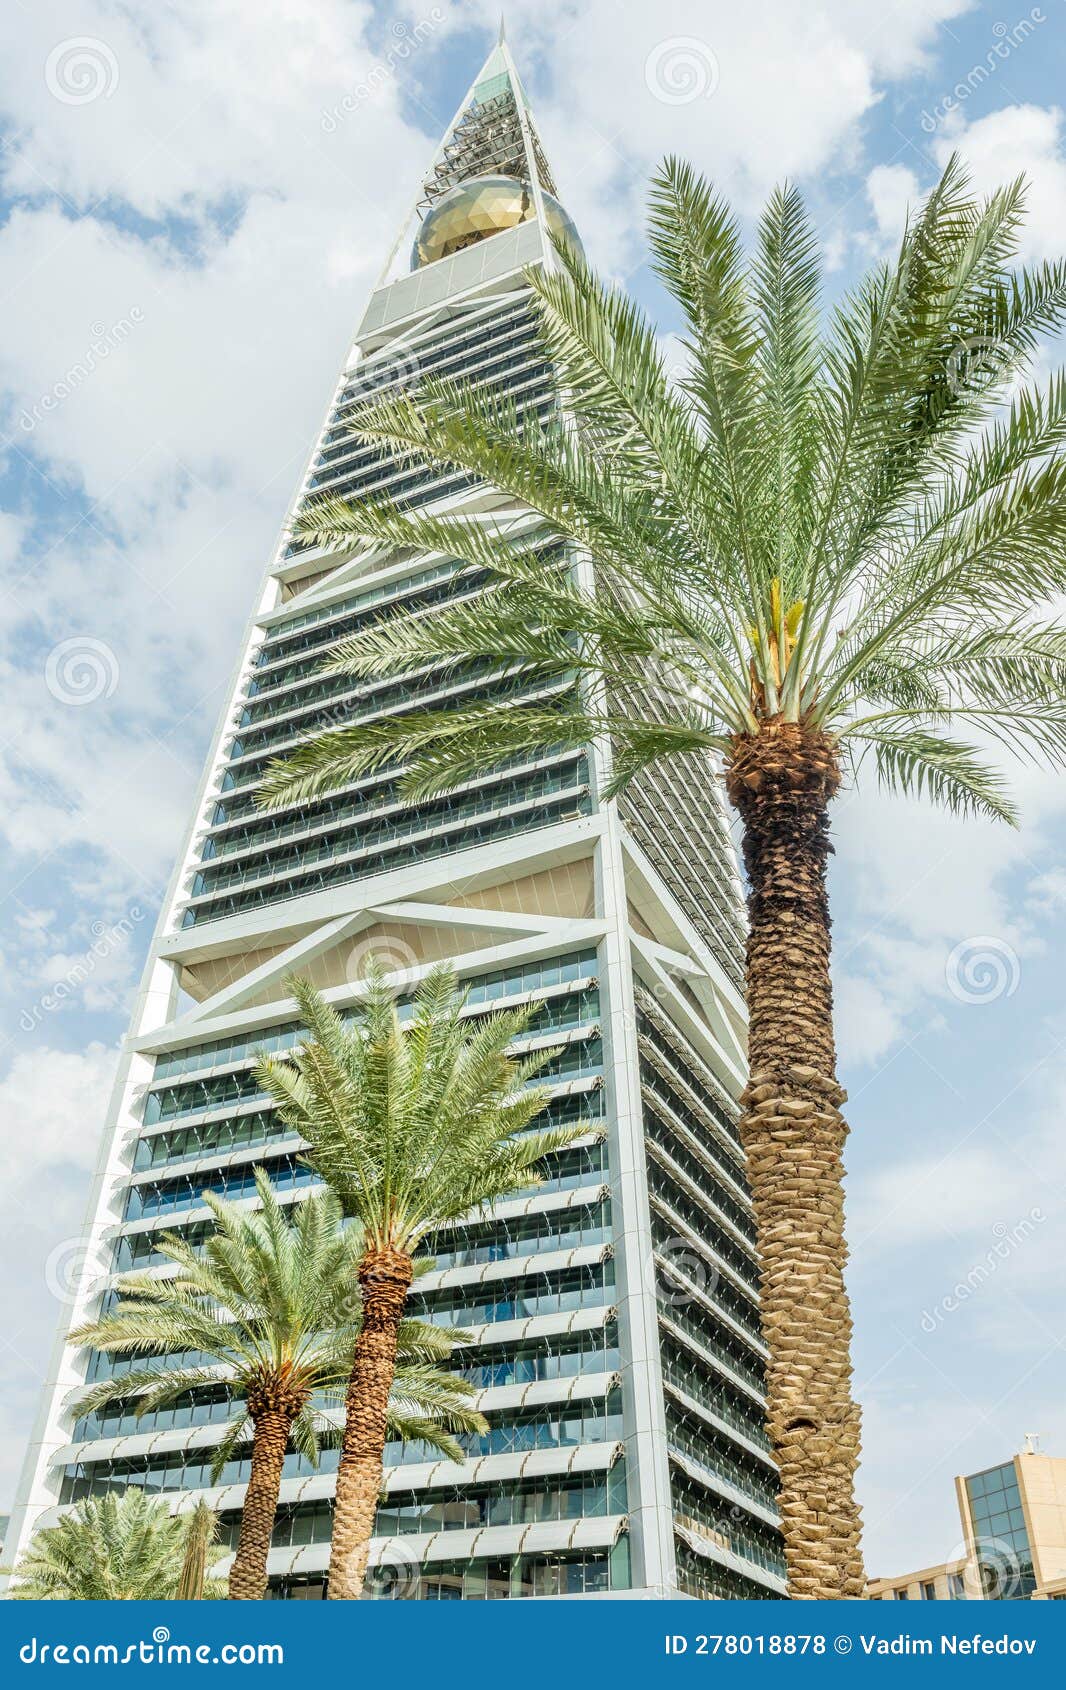 modern buildings in the al olaya downtownt district with palms in the foreground, al riyadh